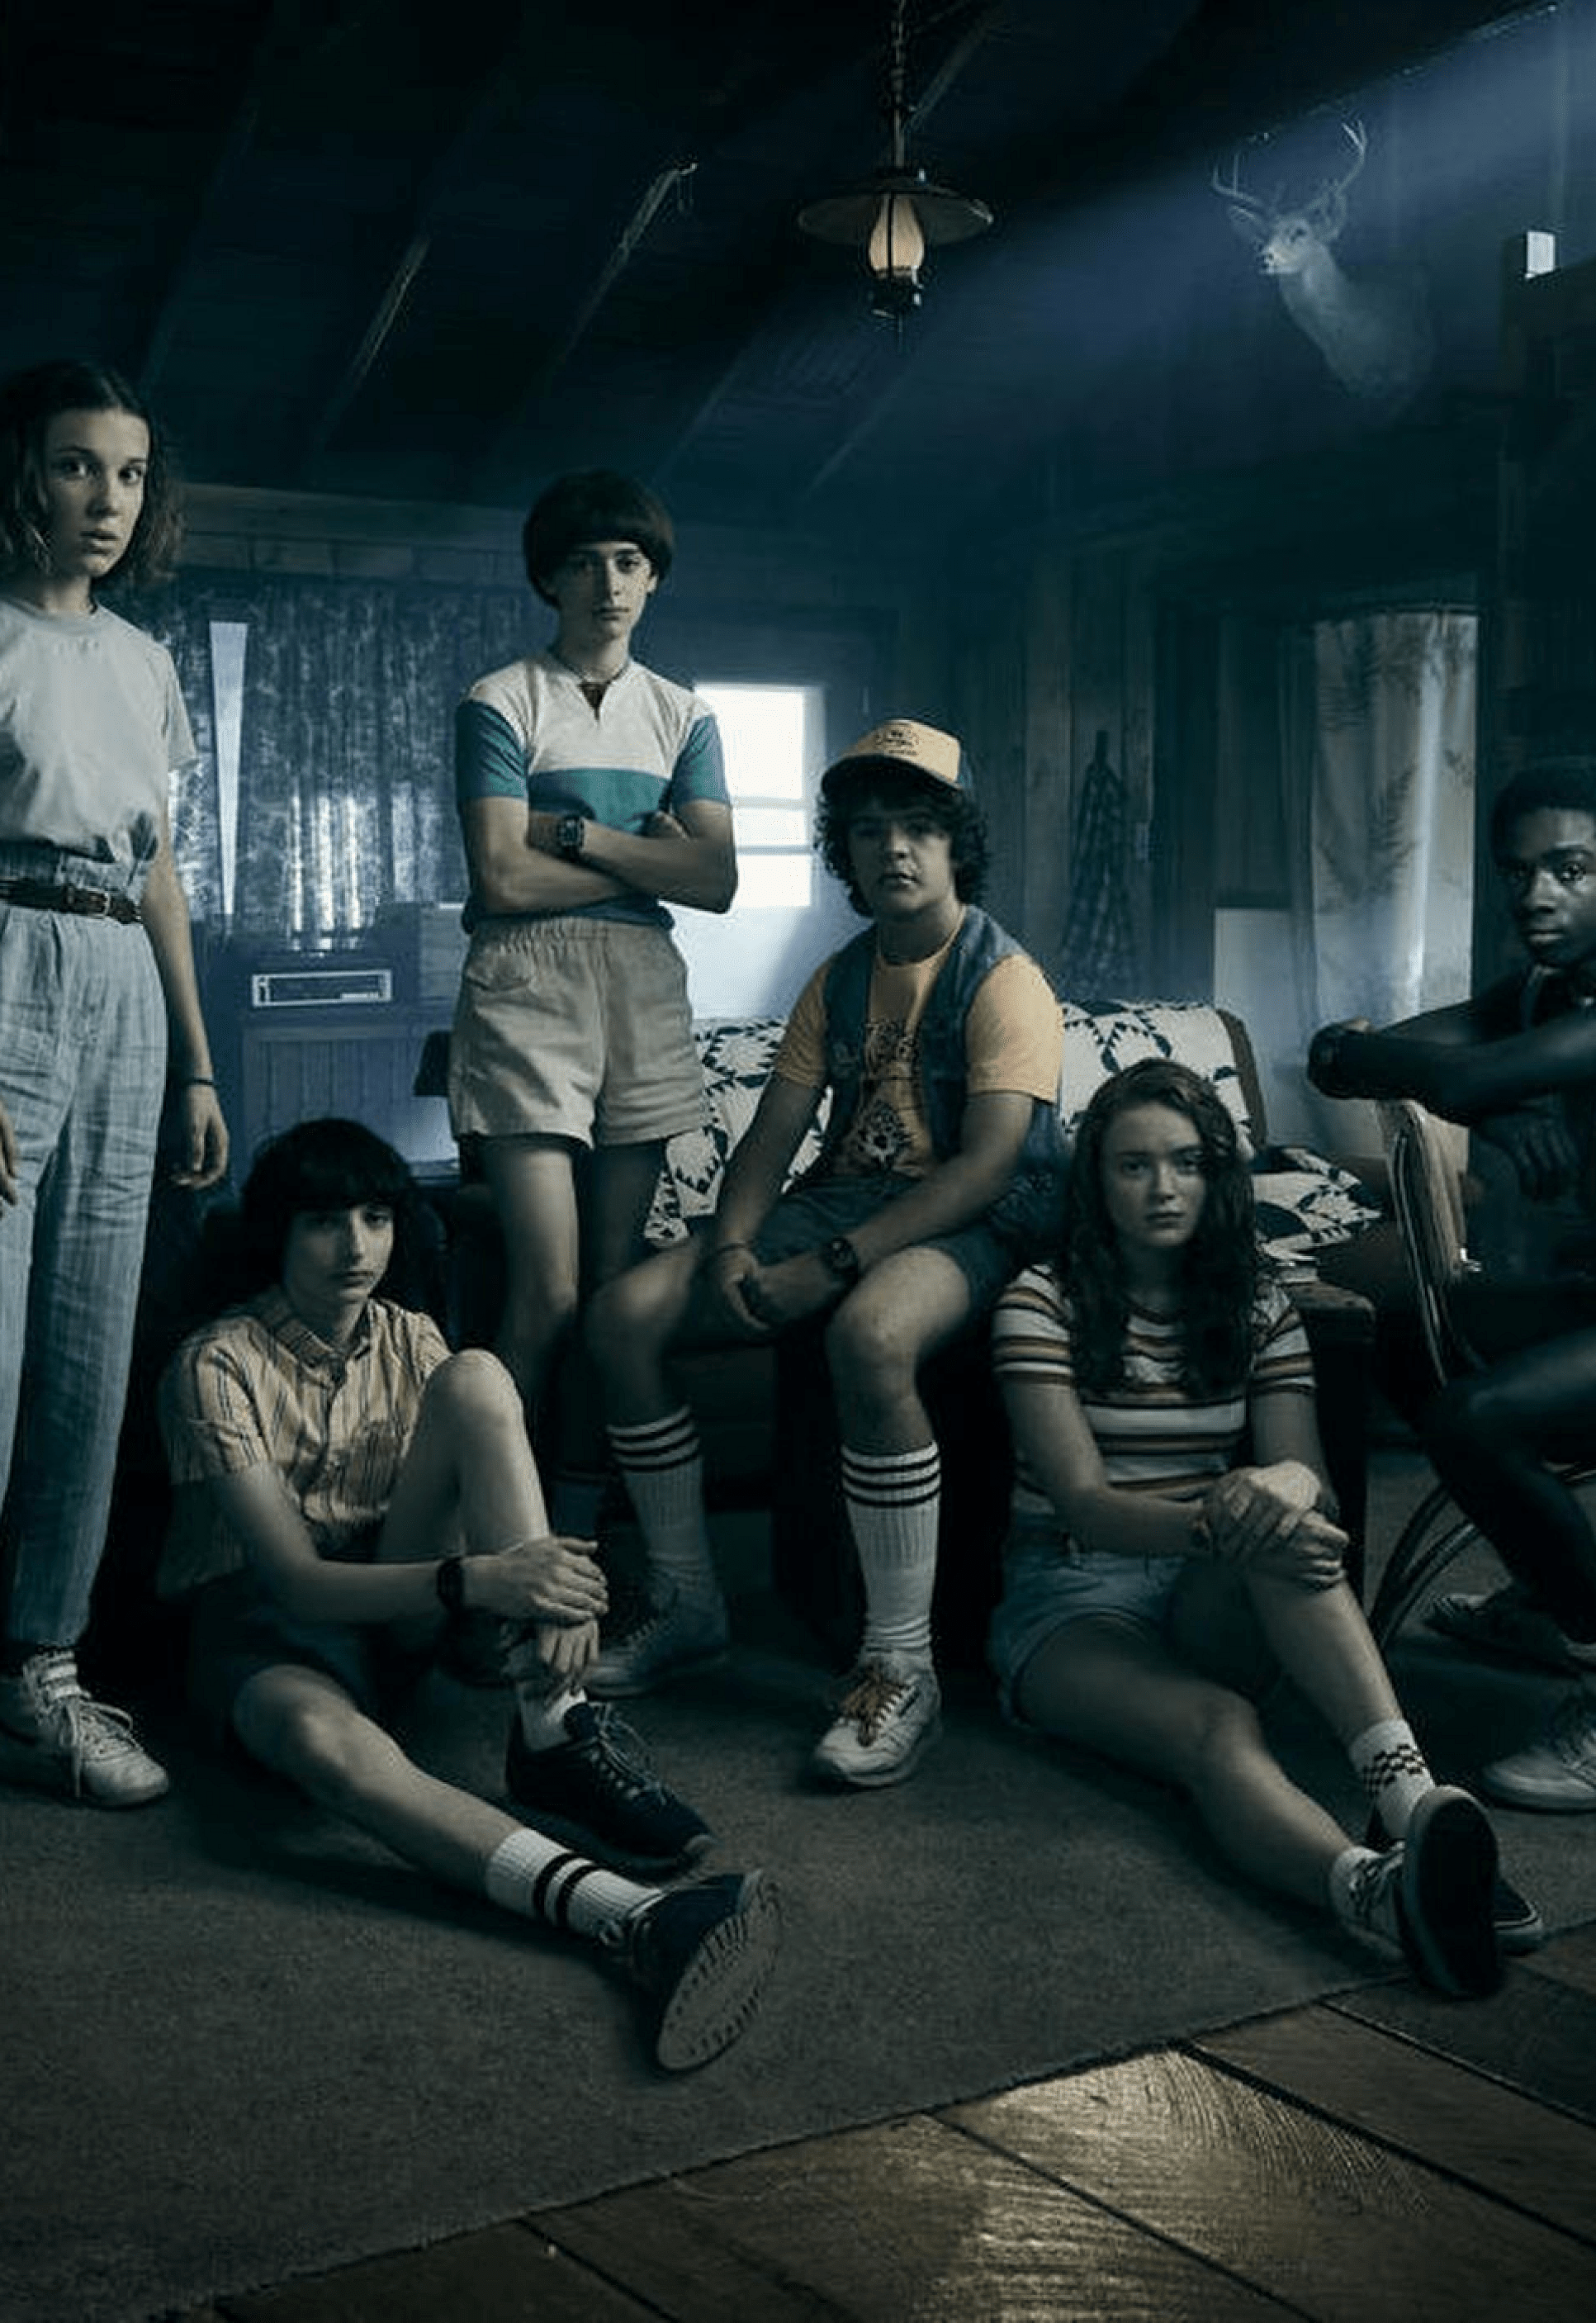 Twitter puzzled after Netflix drops Stranger Things season 5 episode 1 title